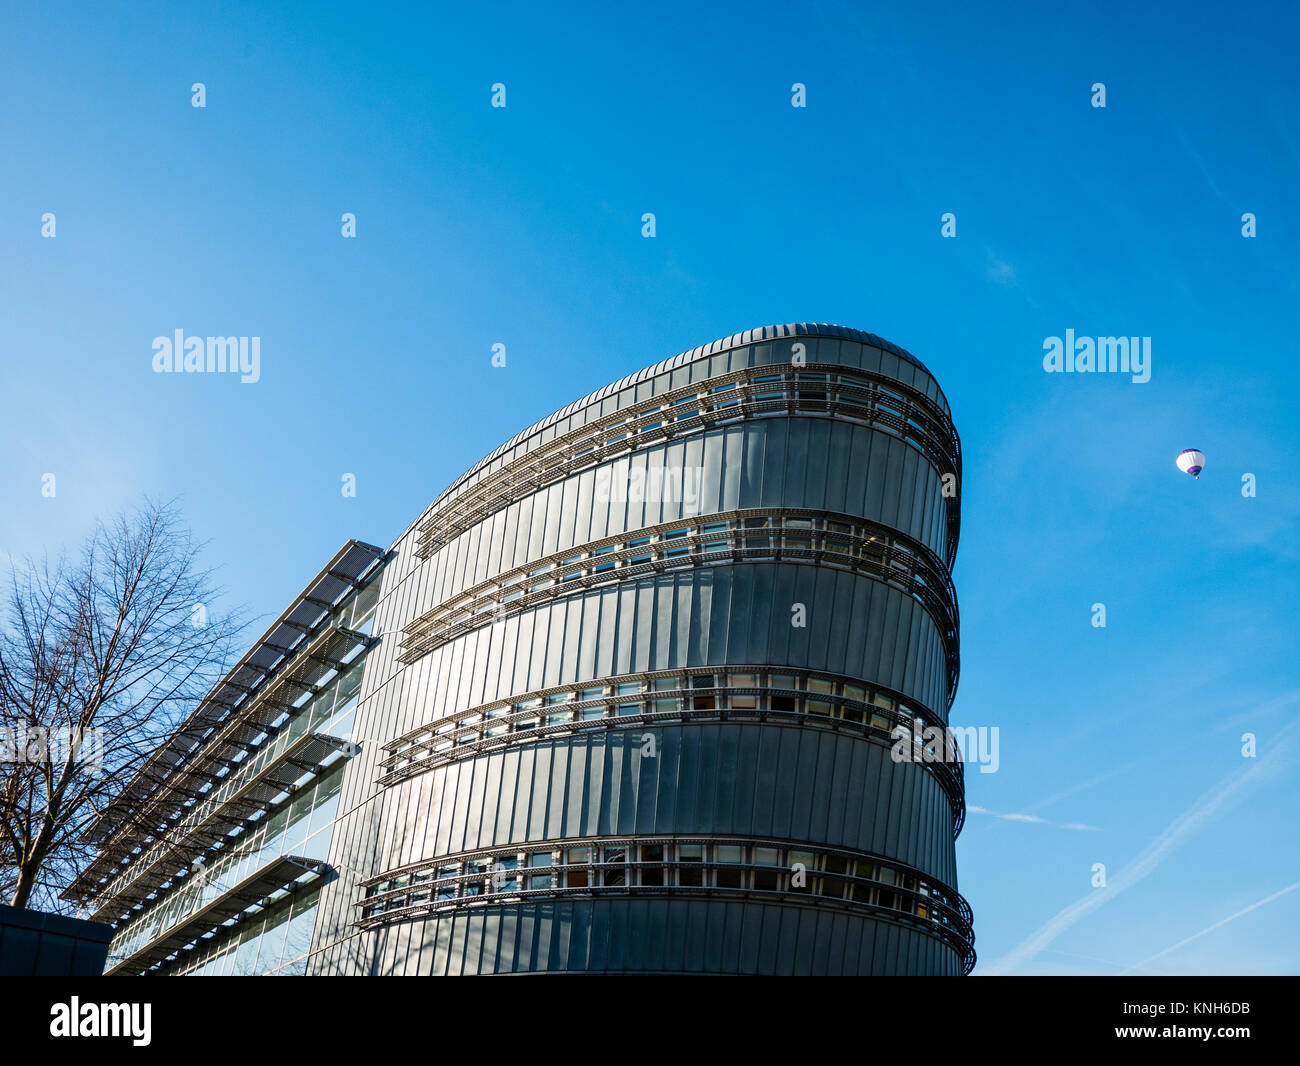 Duke of Kent Building, Faculty of Health and Medical Sciences, School of Health Sciences, University of Surrey, Guildford, Surrey, England, UK, GB. Stock Photo